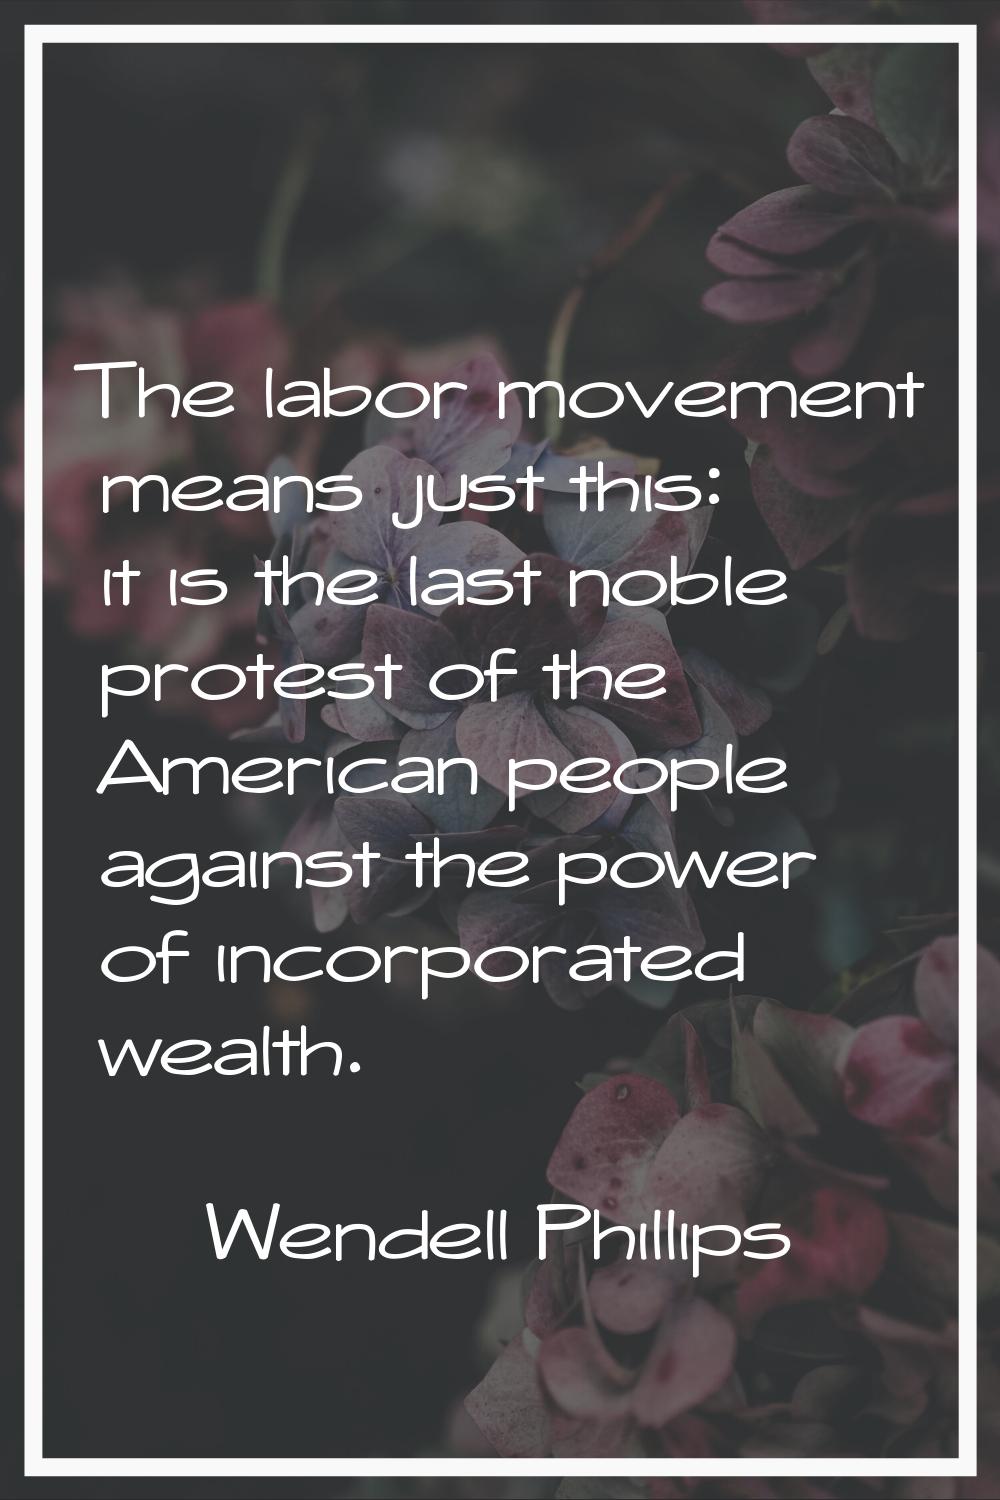 The labor movement means just this: it is the last noble protest of the American people against the